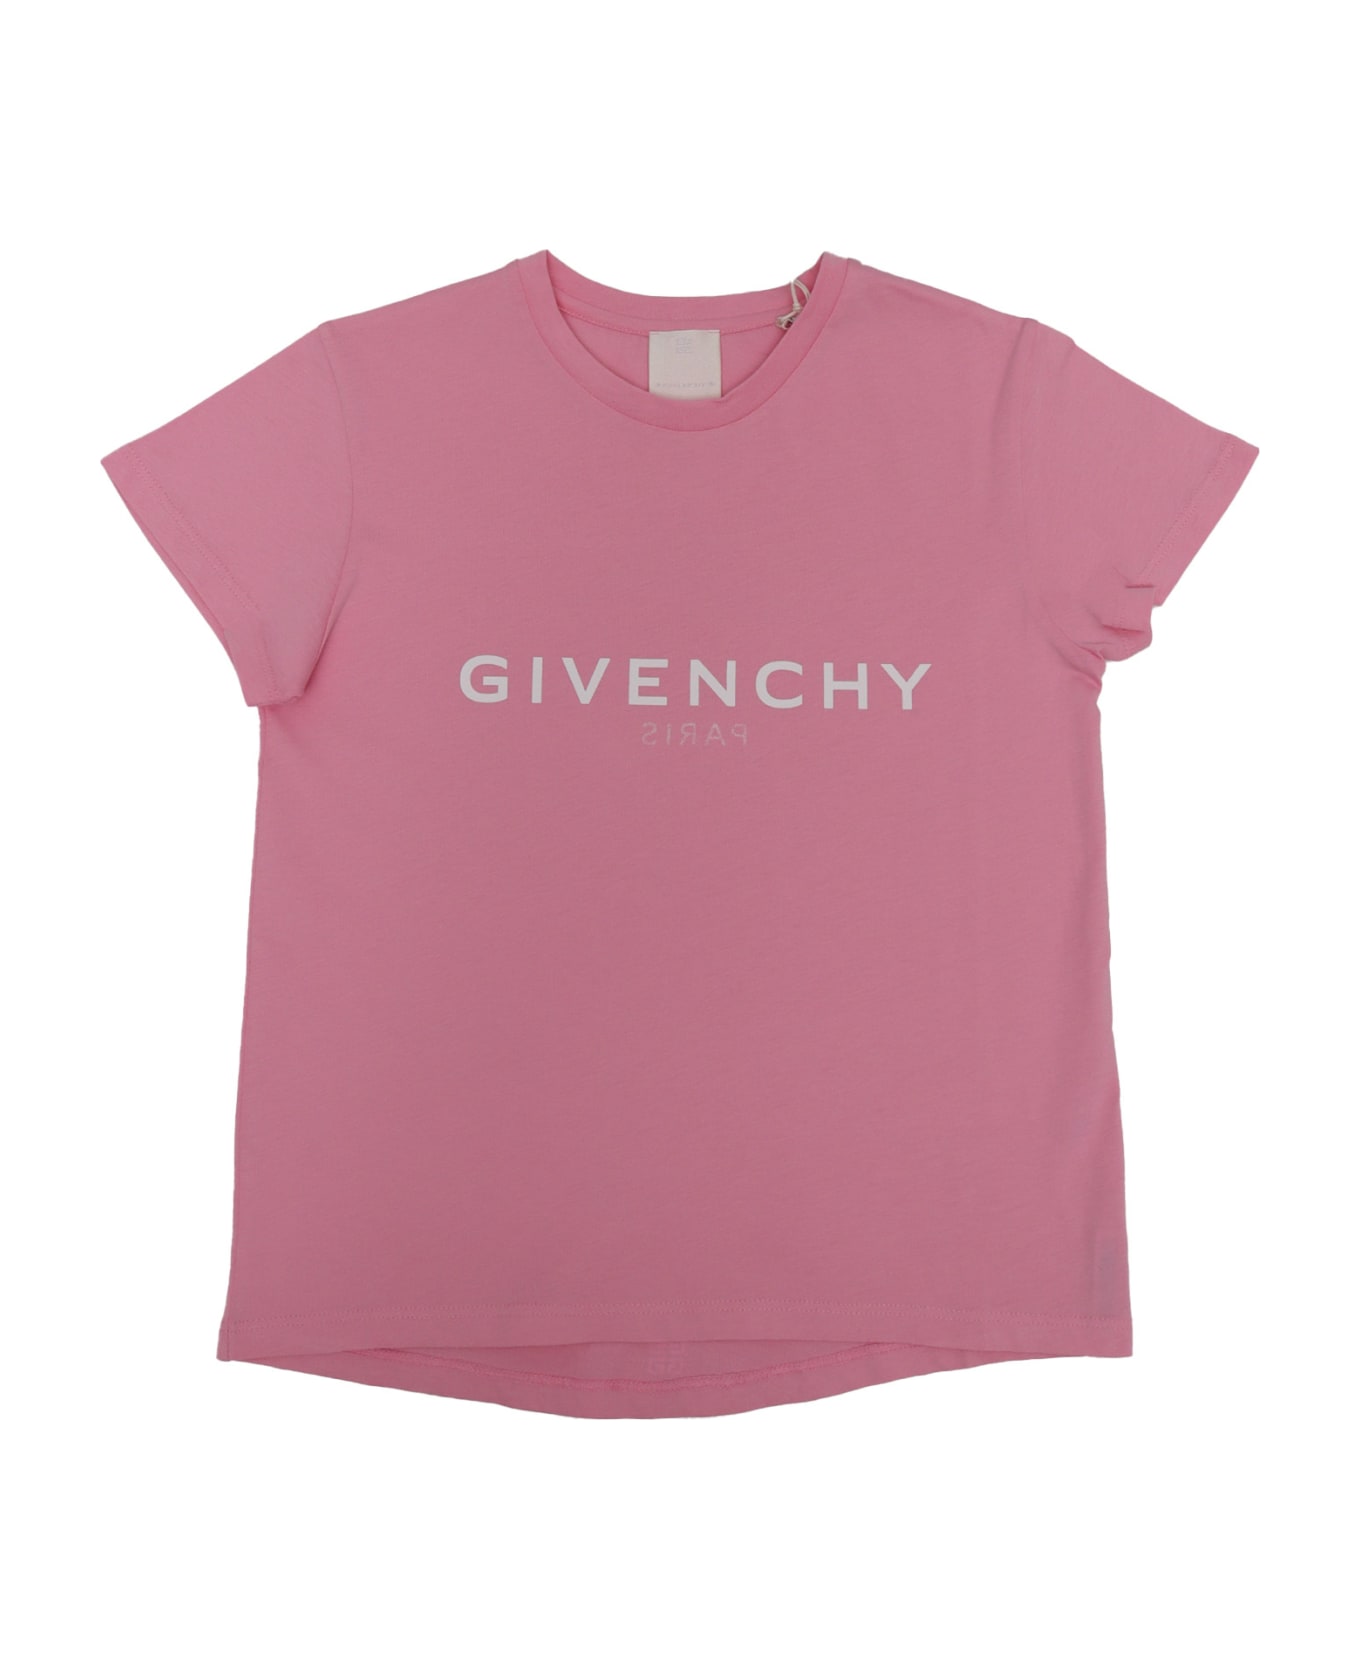 Givenchy Lettering Logo T-shirt - PINK